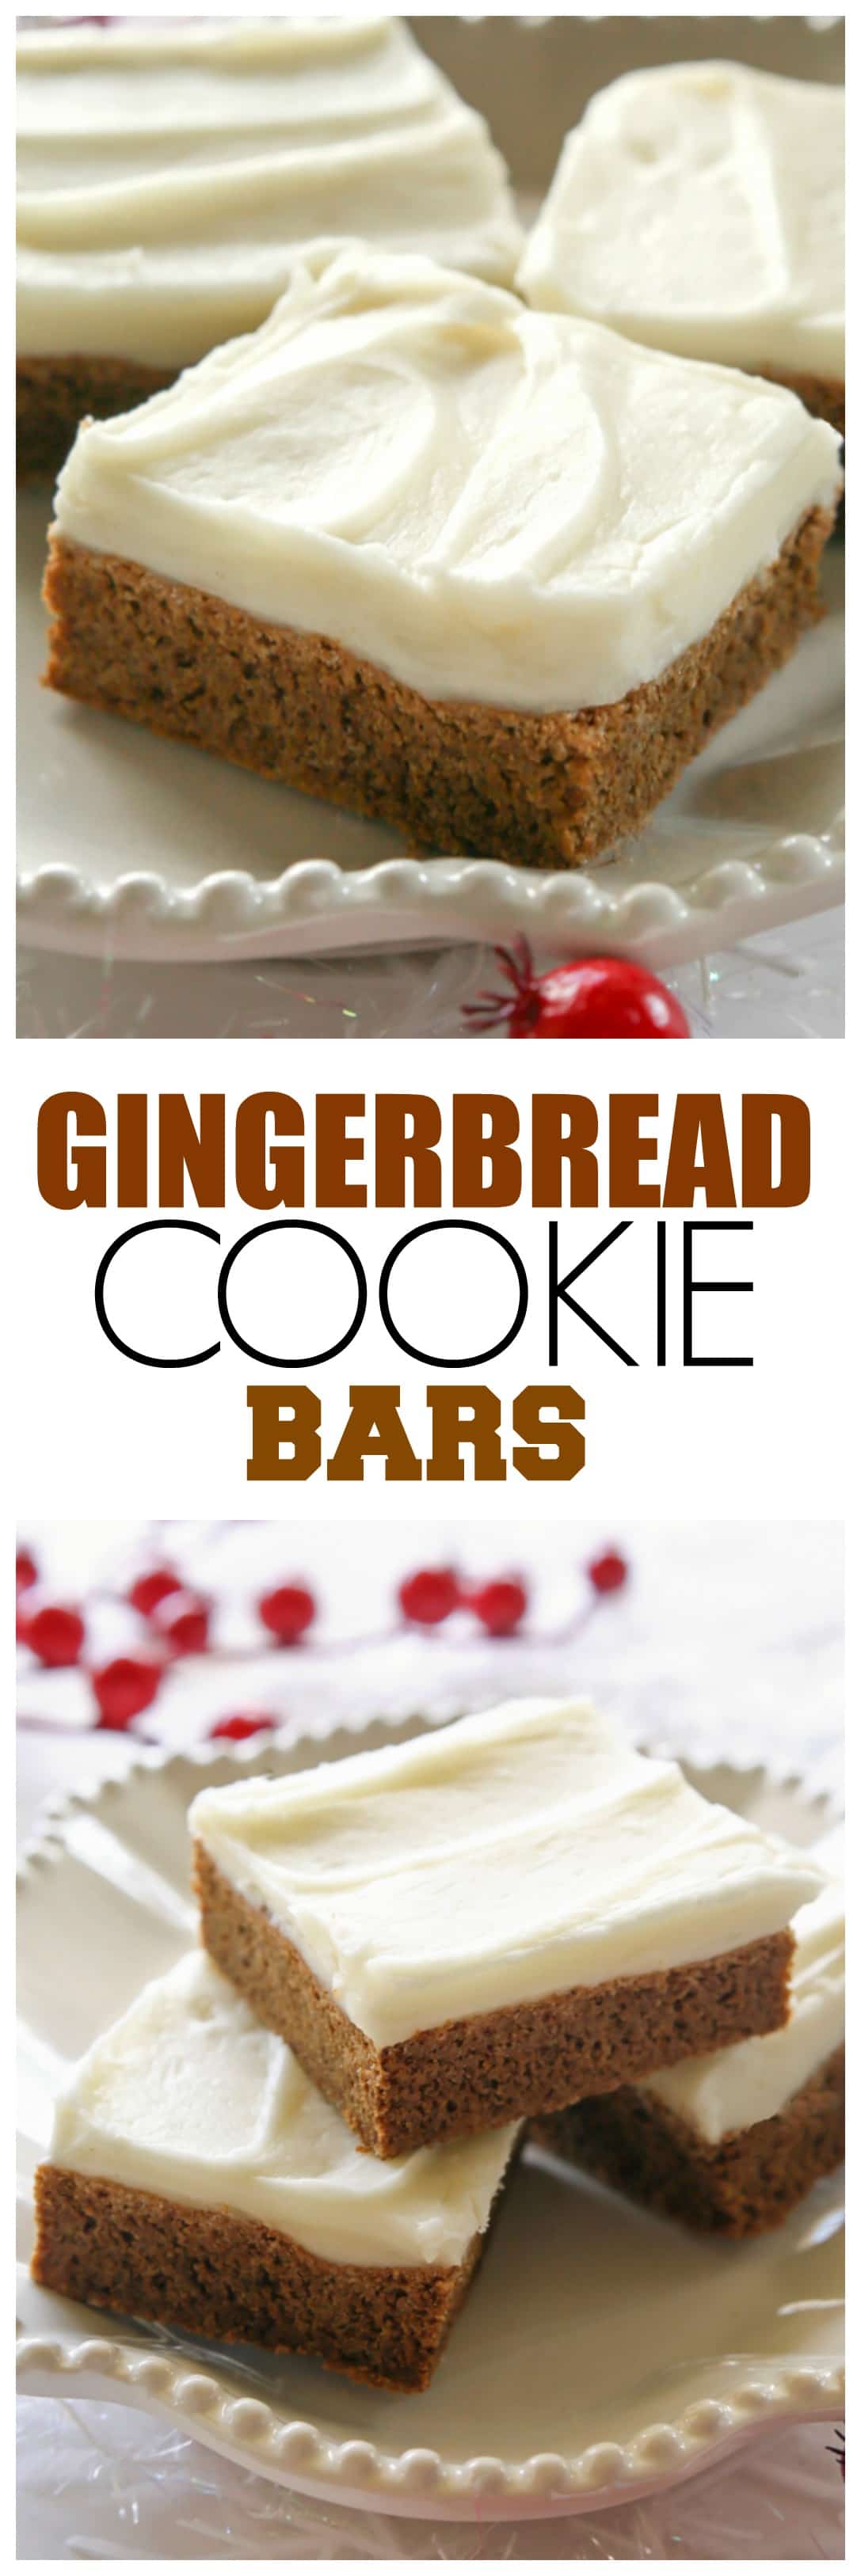 Gingerbread Cookie Bars - incredibly soft and chewy. Way easier than making gingerbread men. the-girl-who-ate-everything.com